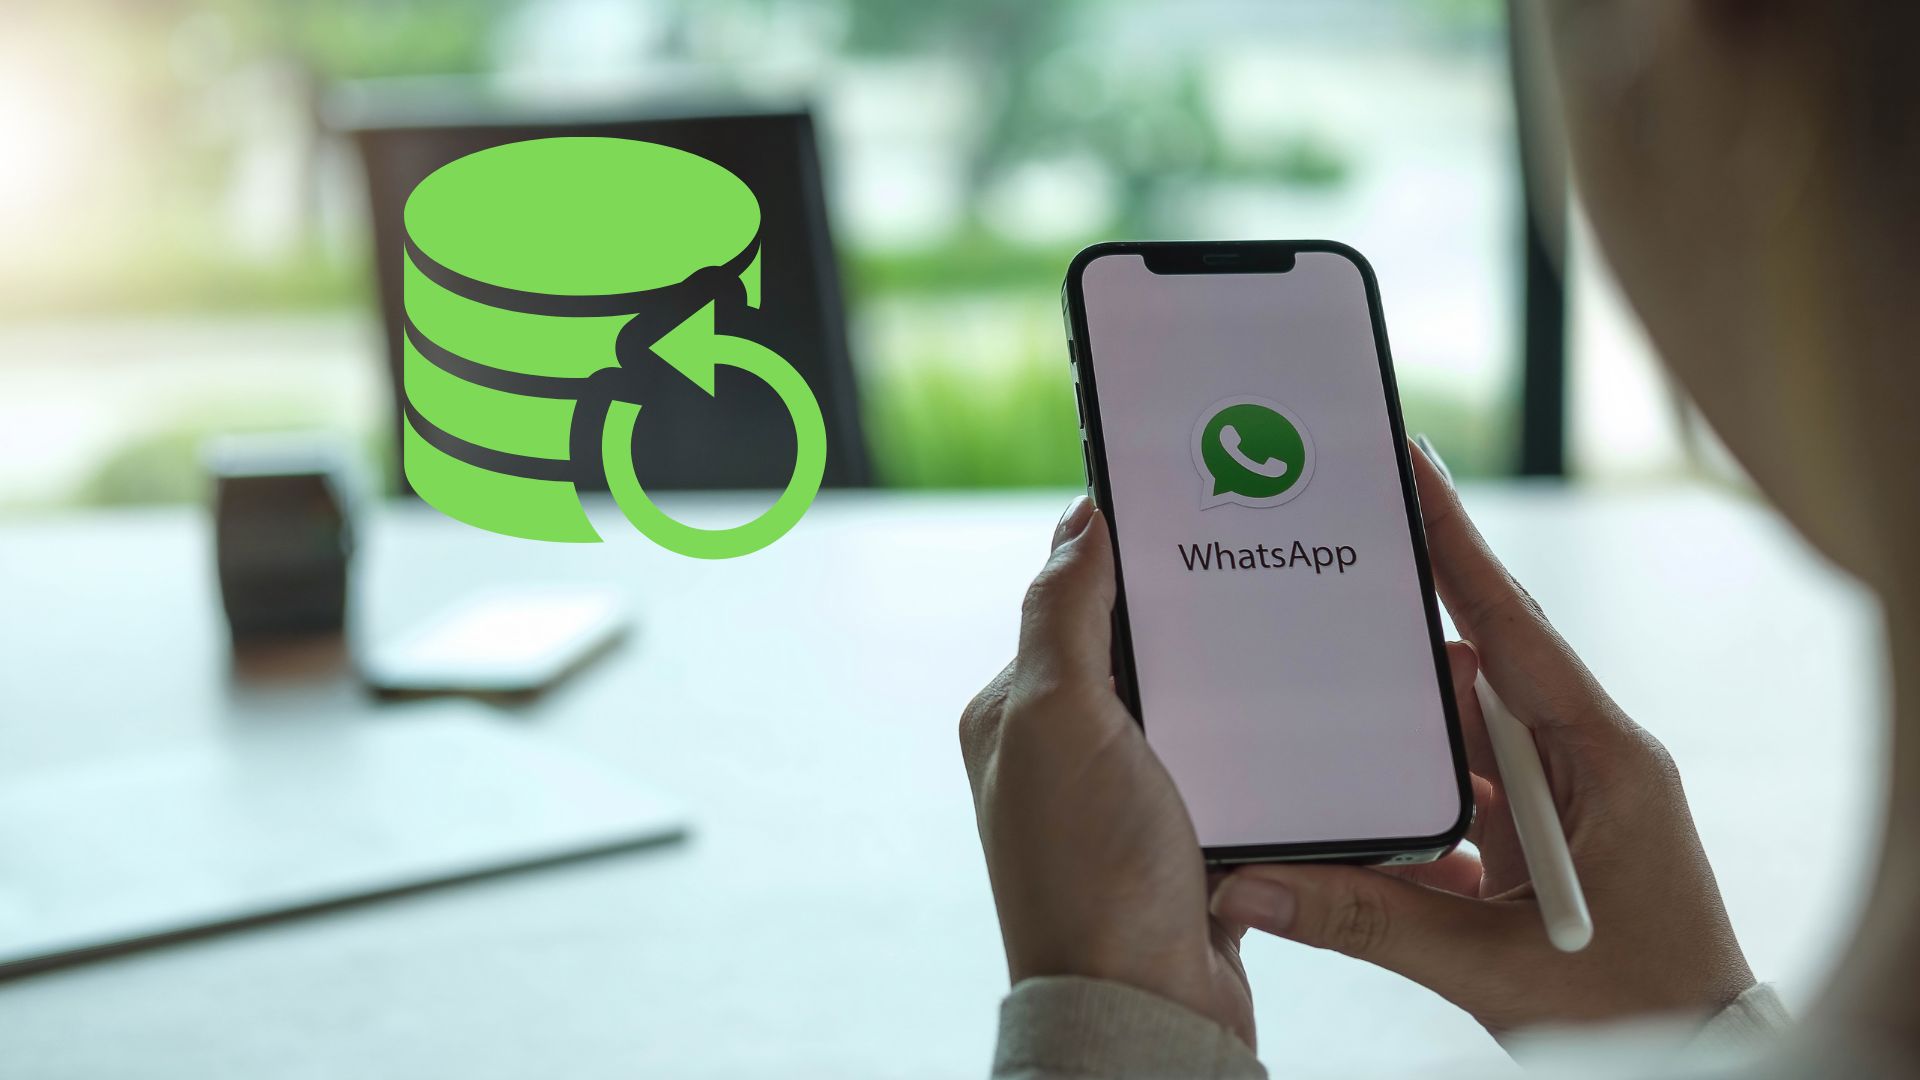 Where to Find Your WhatsApp Backup